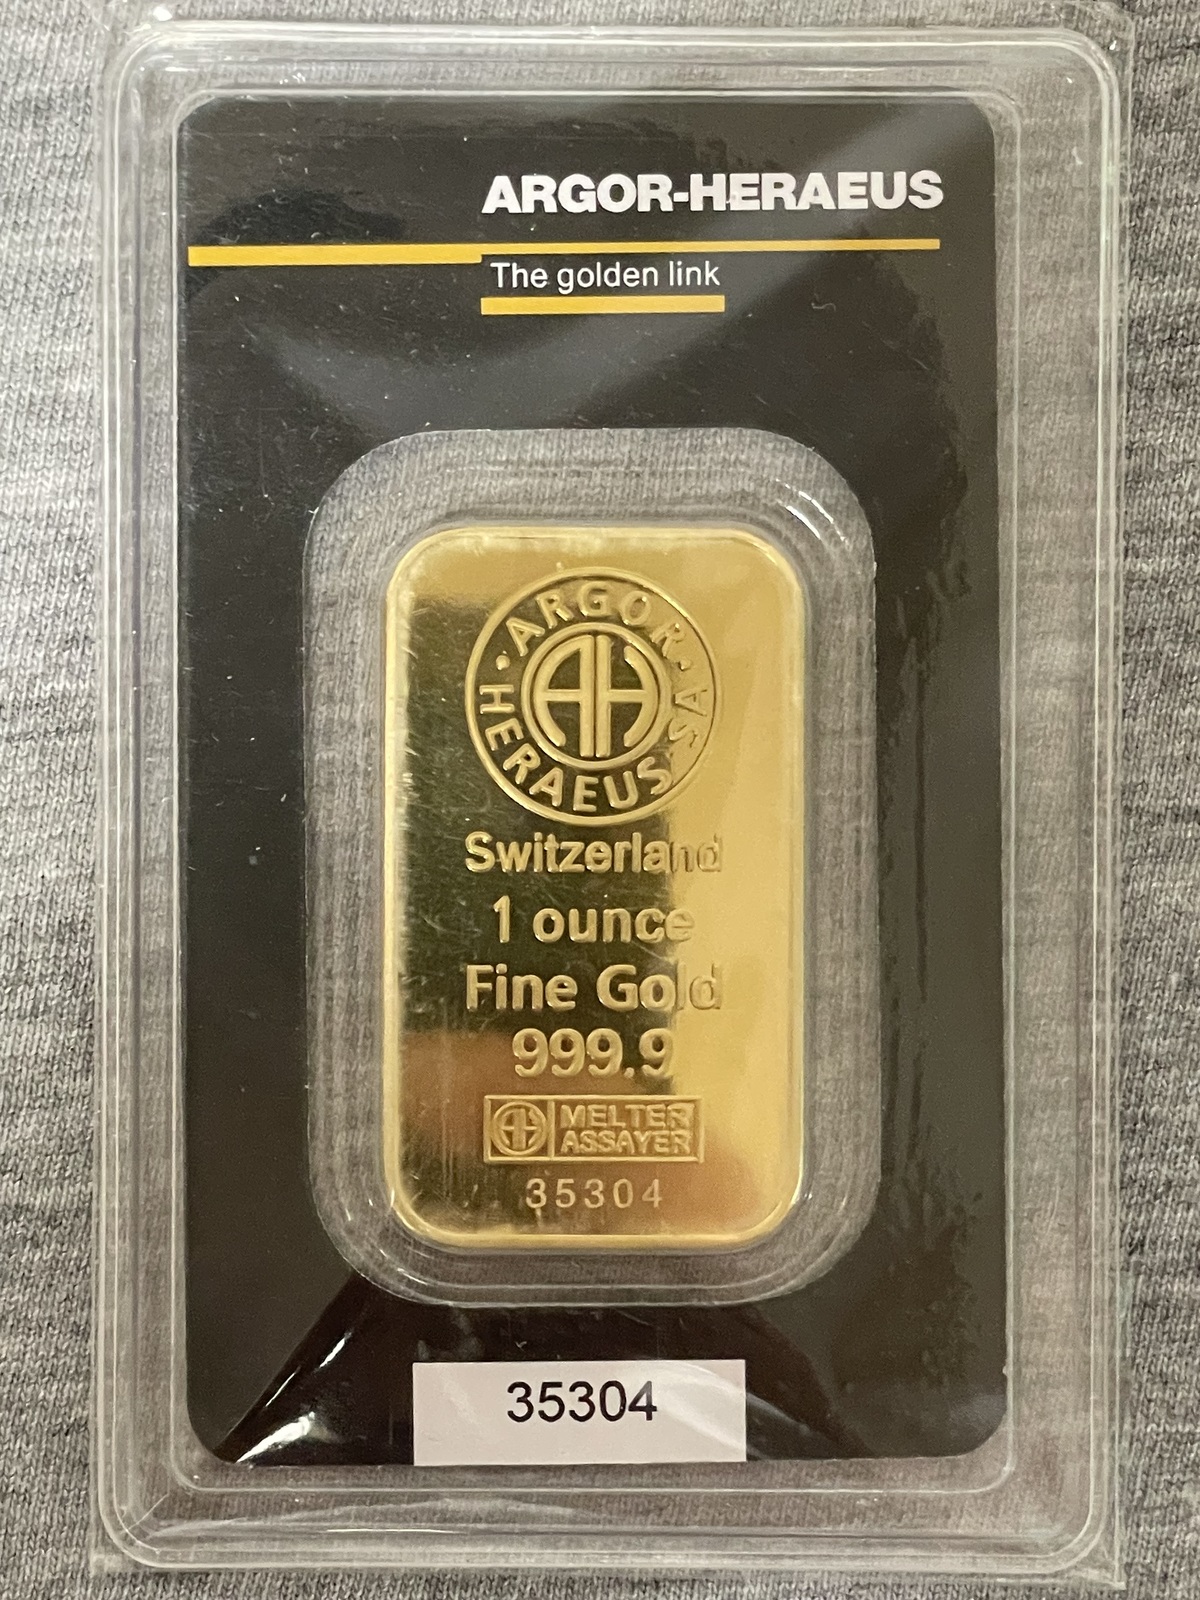 Primary image for Gold Bar ARGOR-HERAEUS 1 Ounce Fine Gold 999.9 In Sealed Assay